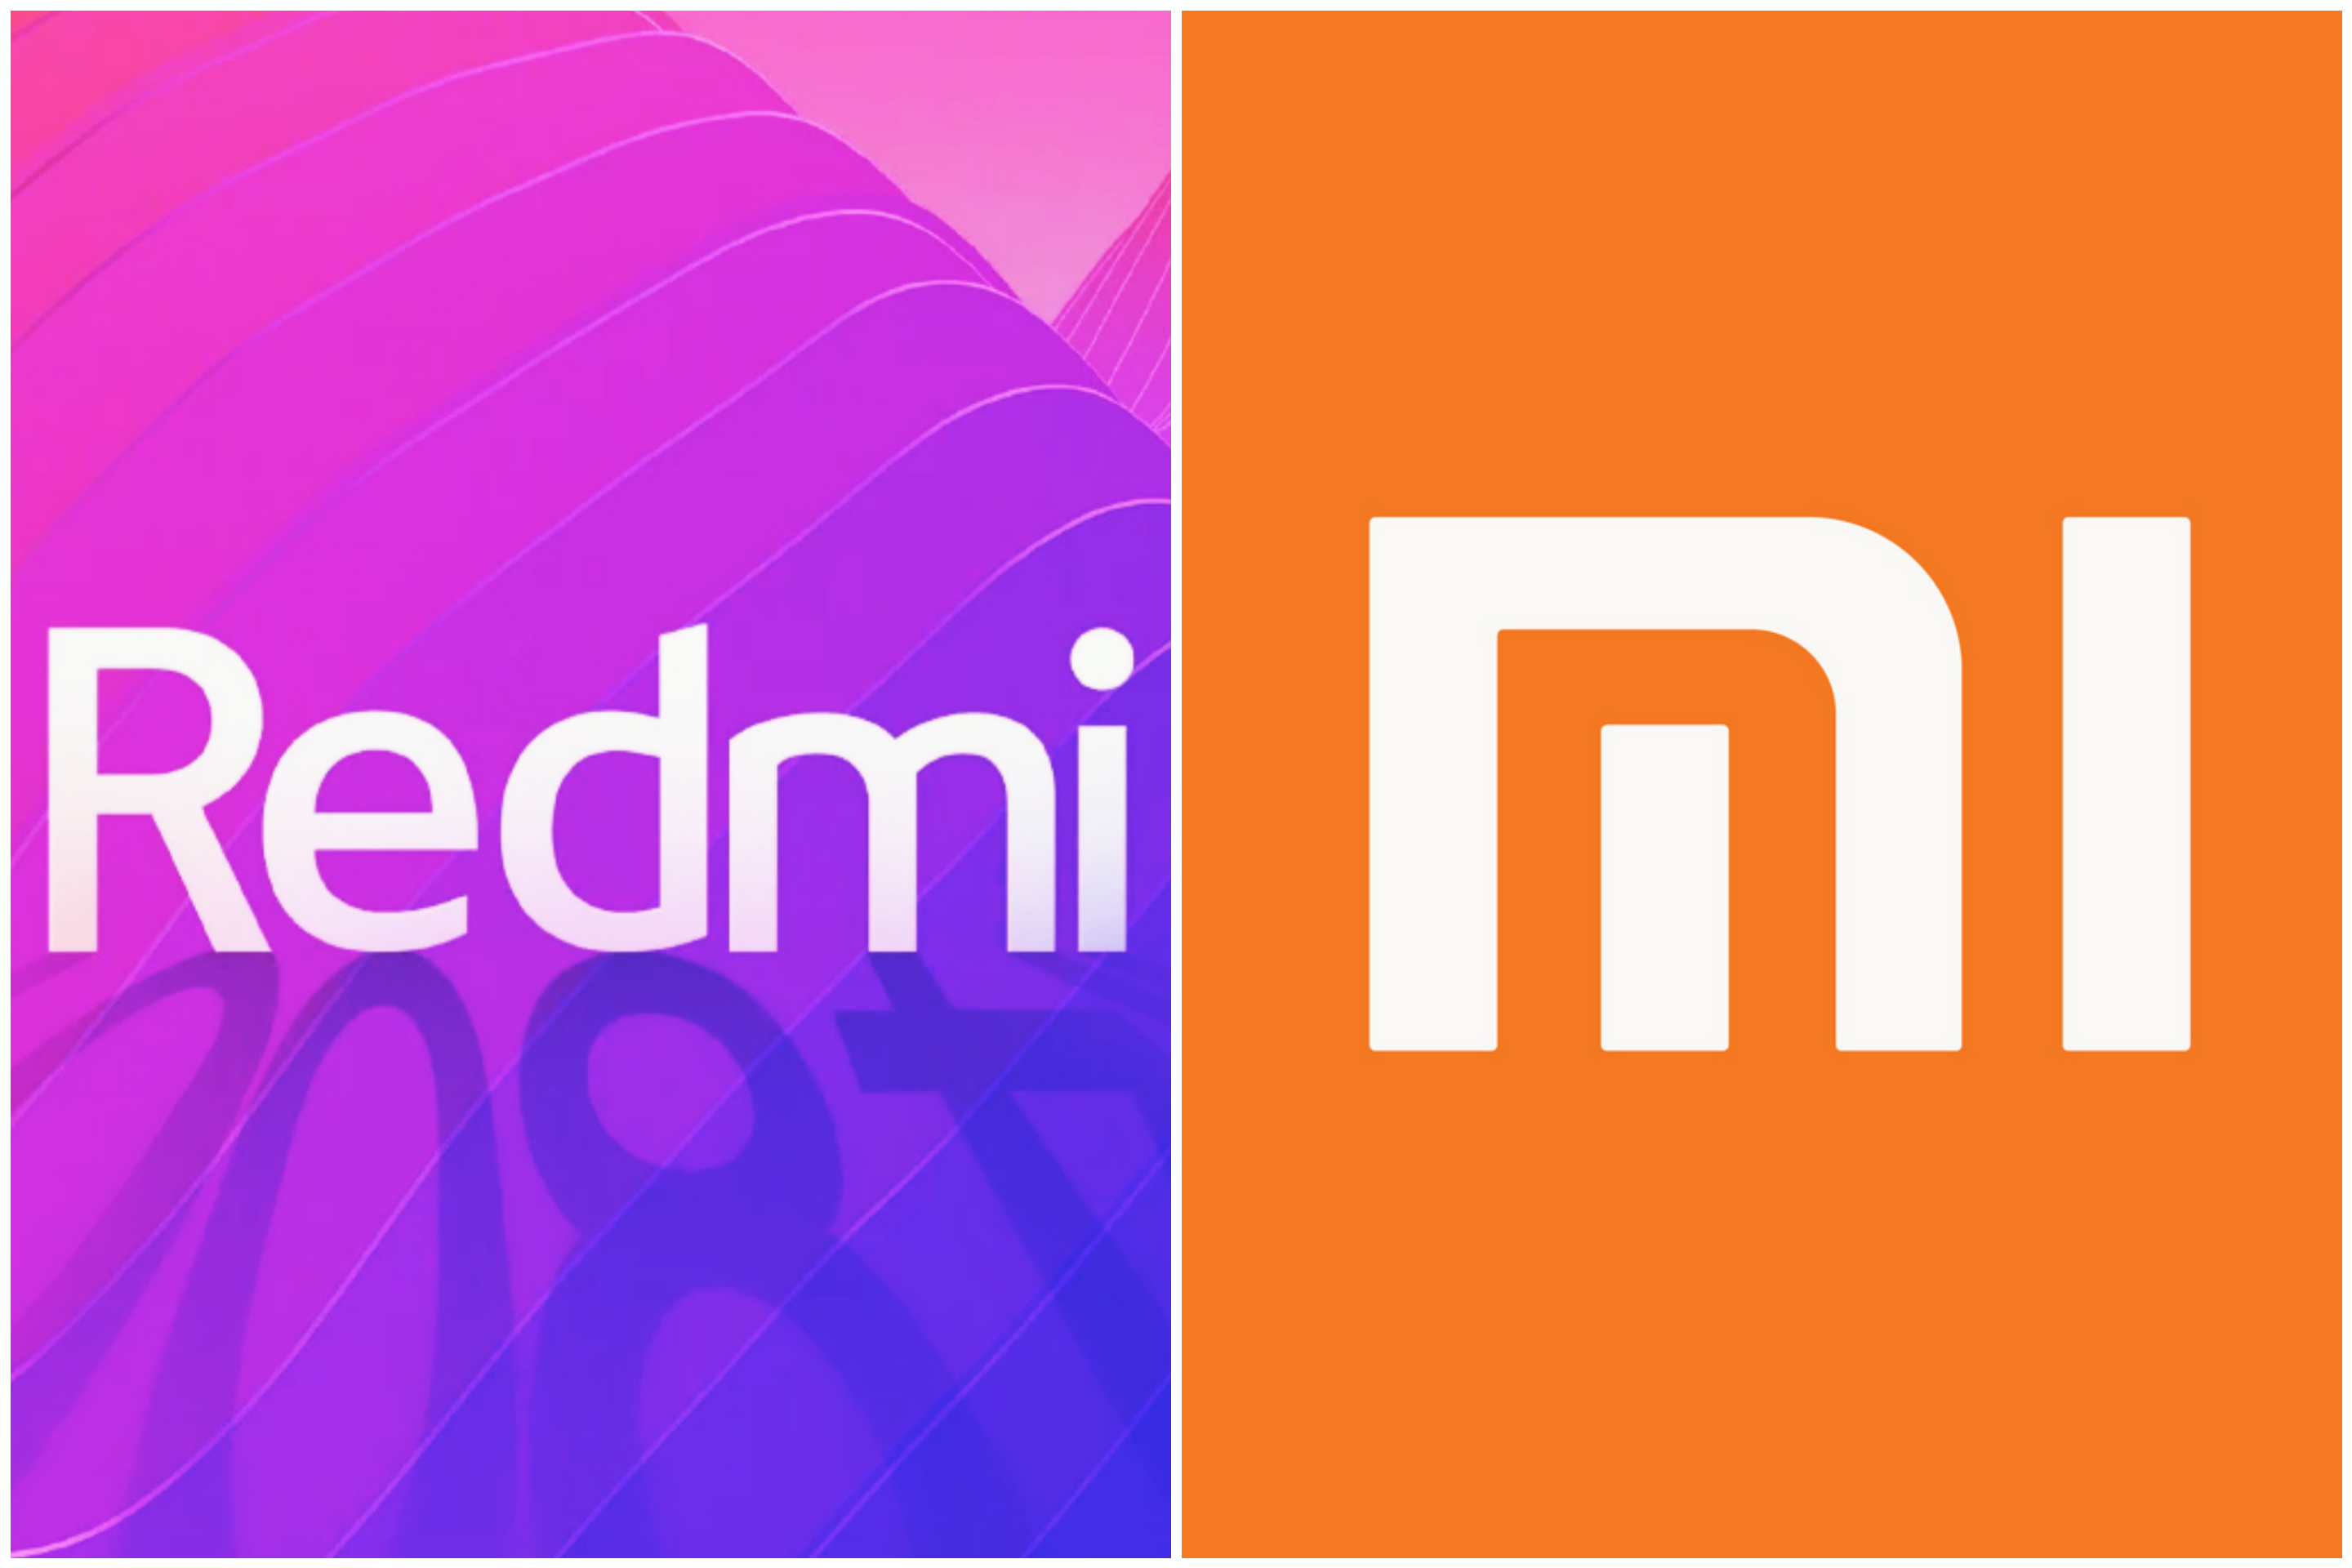 Why has the Redmi brand become independent and produce even m   ore